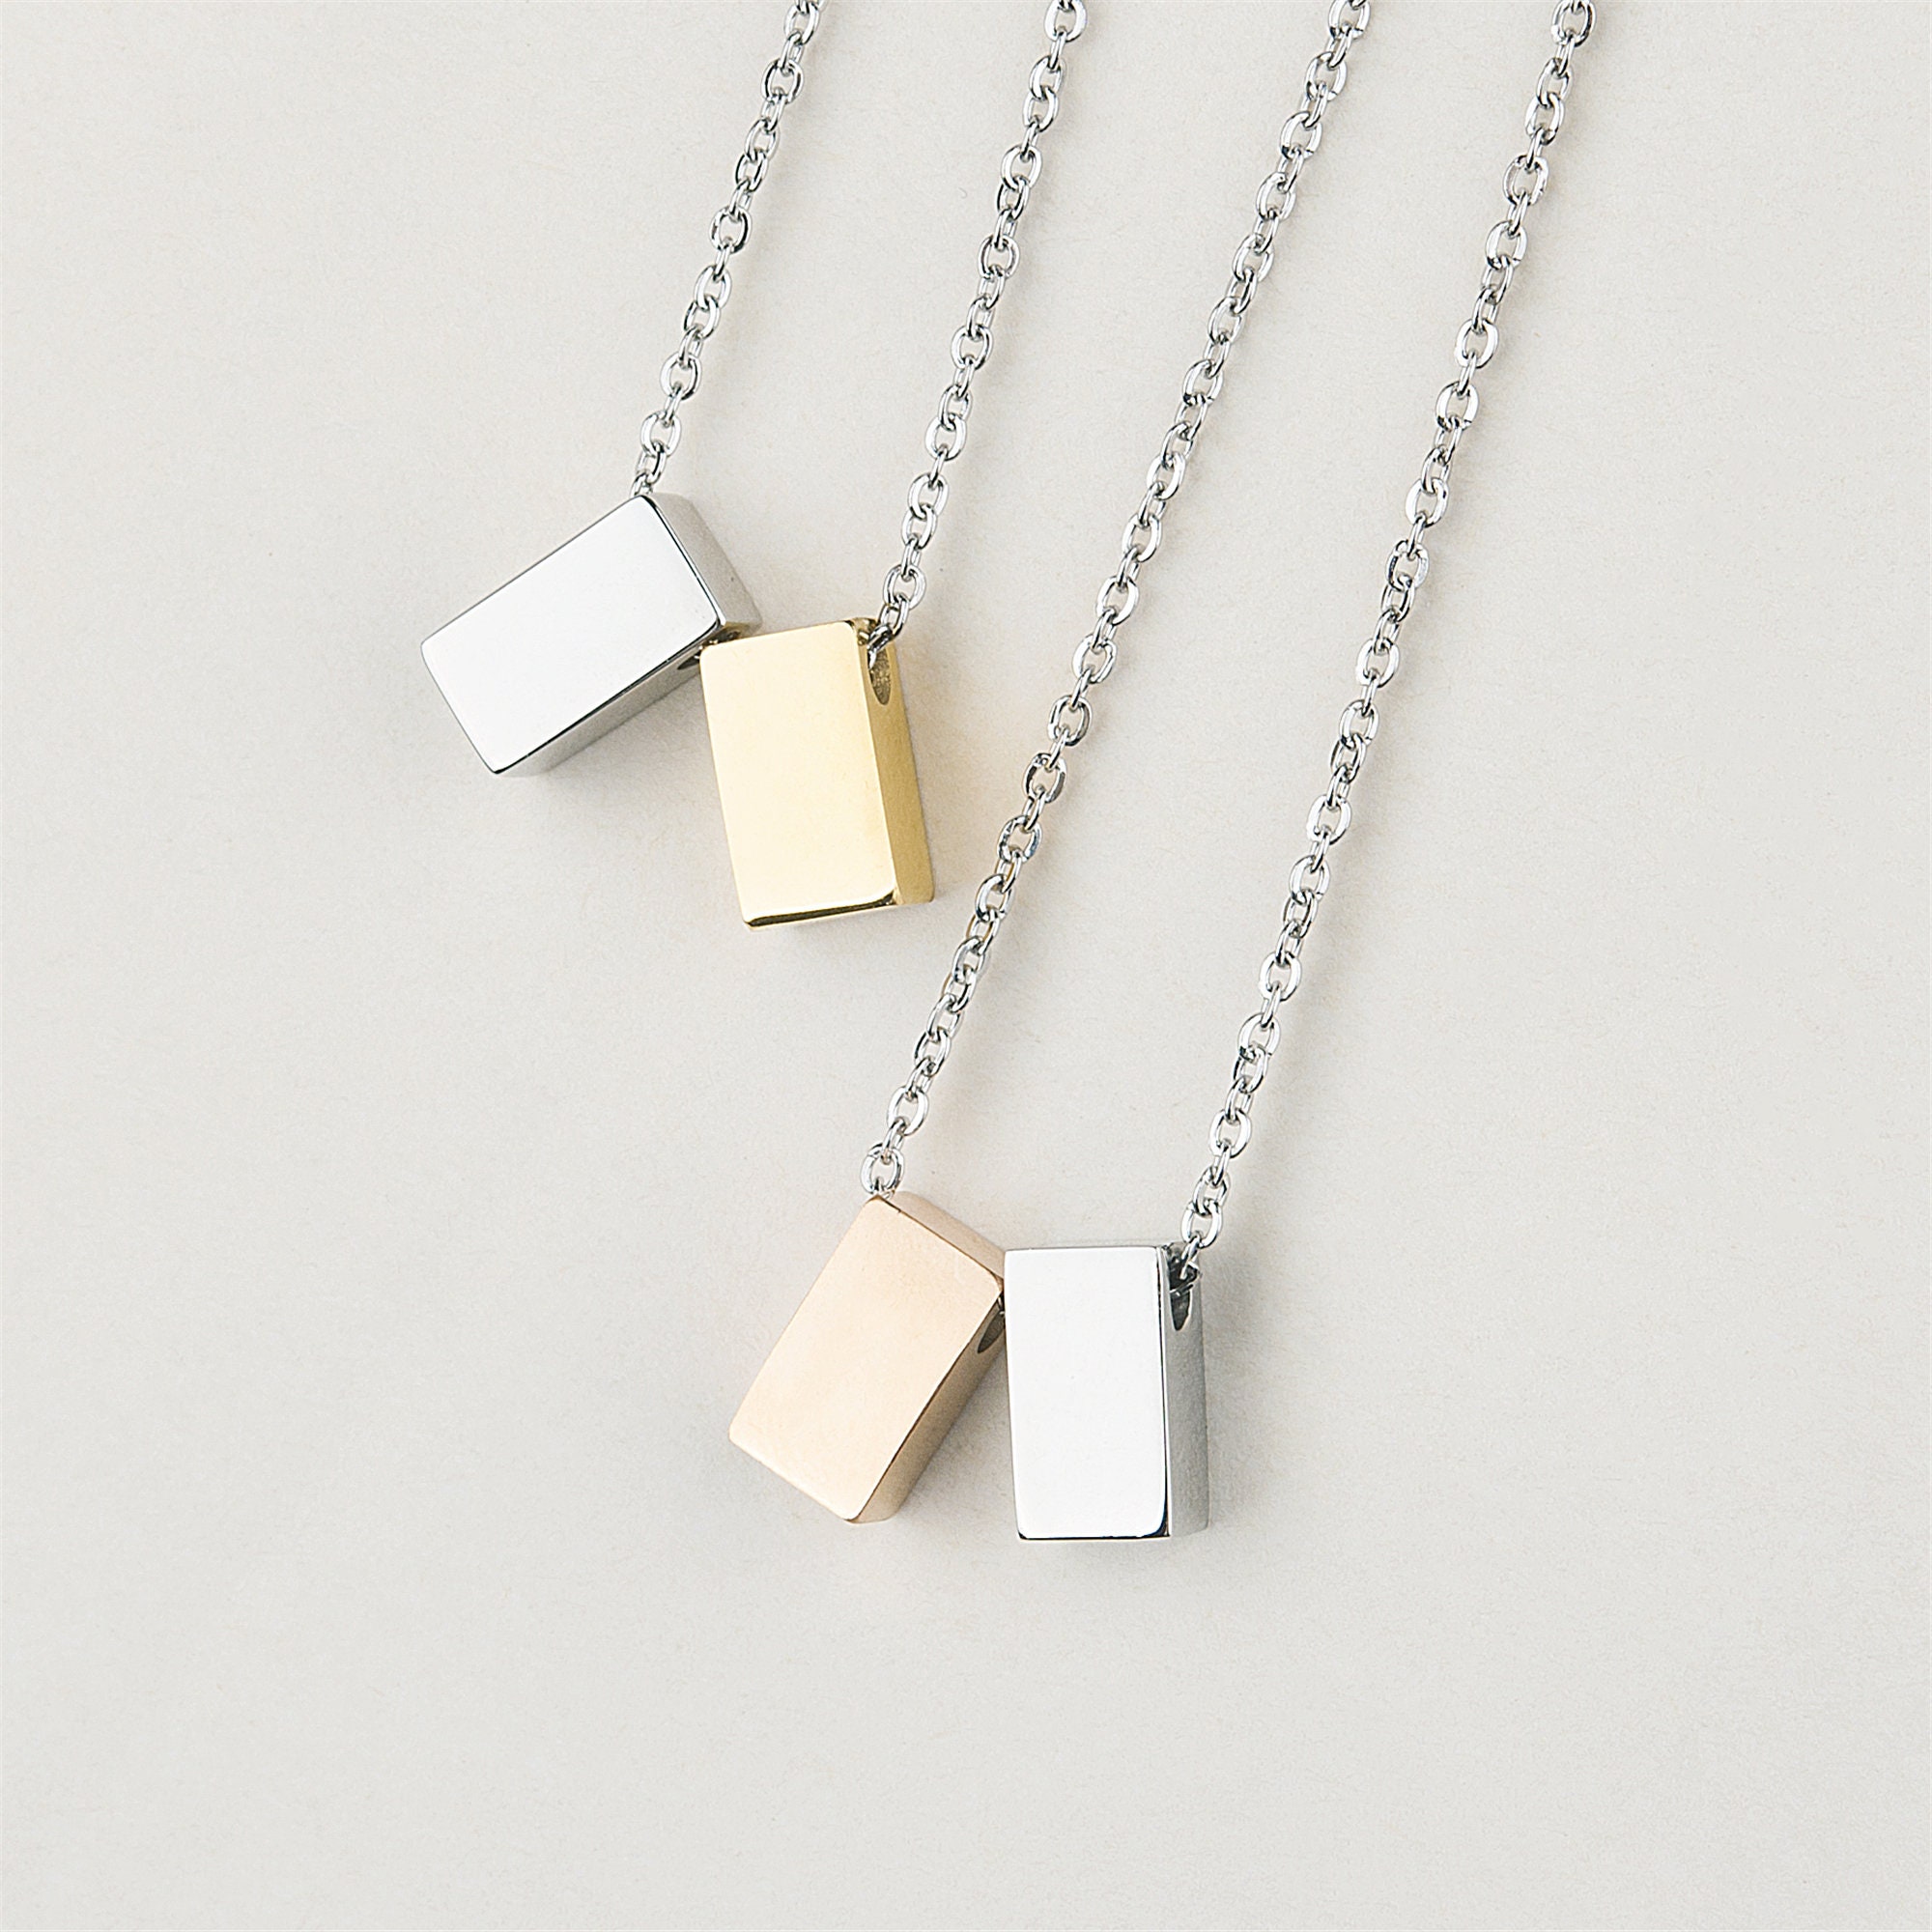 Anavia Sister Necklace, Sister Jewelry Gift, Gift for Sister, Sister Birthday Gift, Anniversary's Day Gift for Her, Double Cubes Pendant Necklace with Wish Card -[1 Silver & 1 Rose Gold] - image 4 of 7